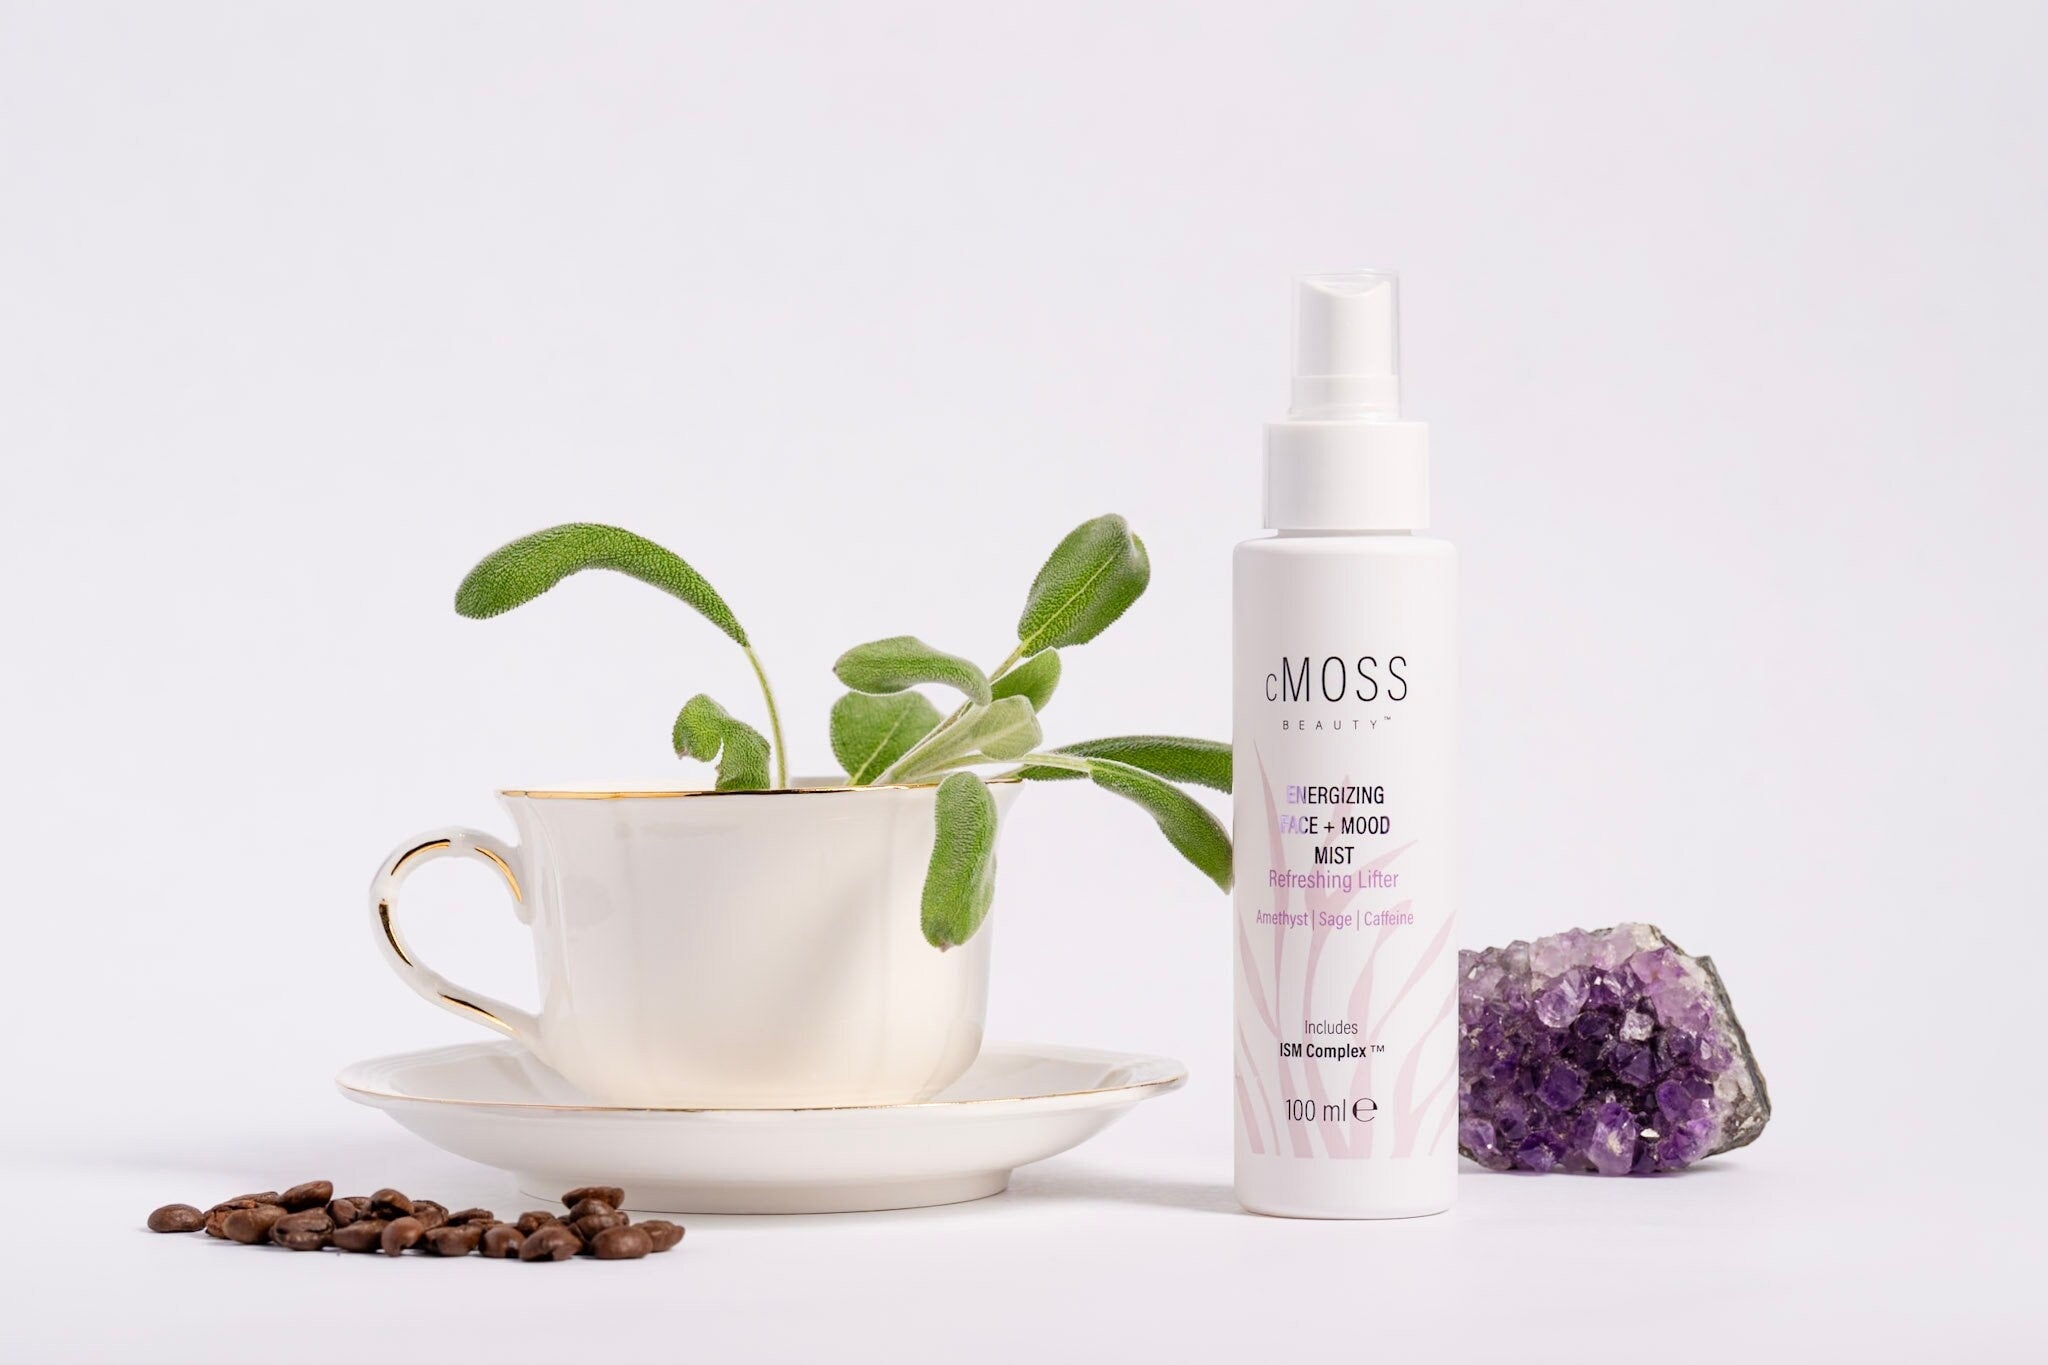 cmoss energizing face and mood mist next to amethyst tea cup and coffee beans